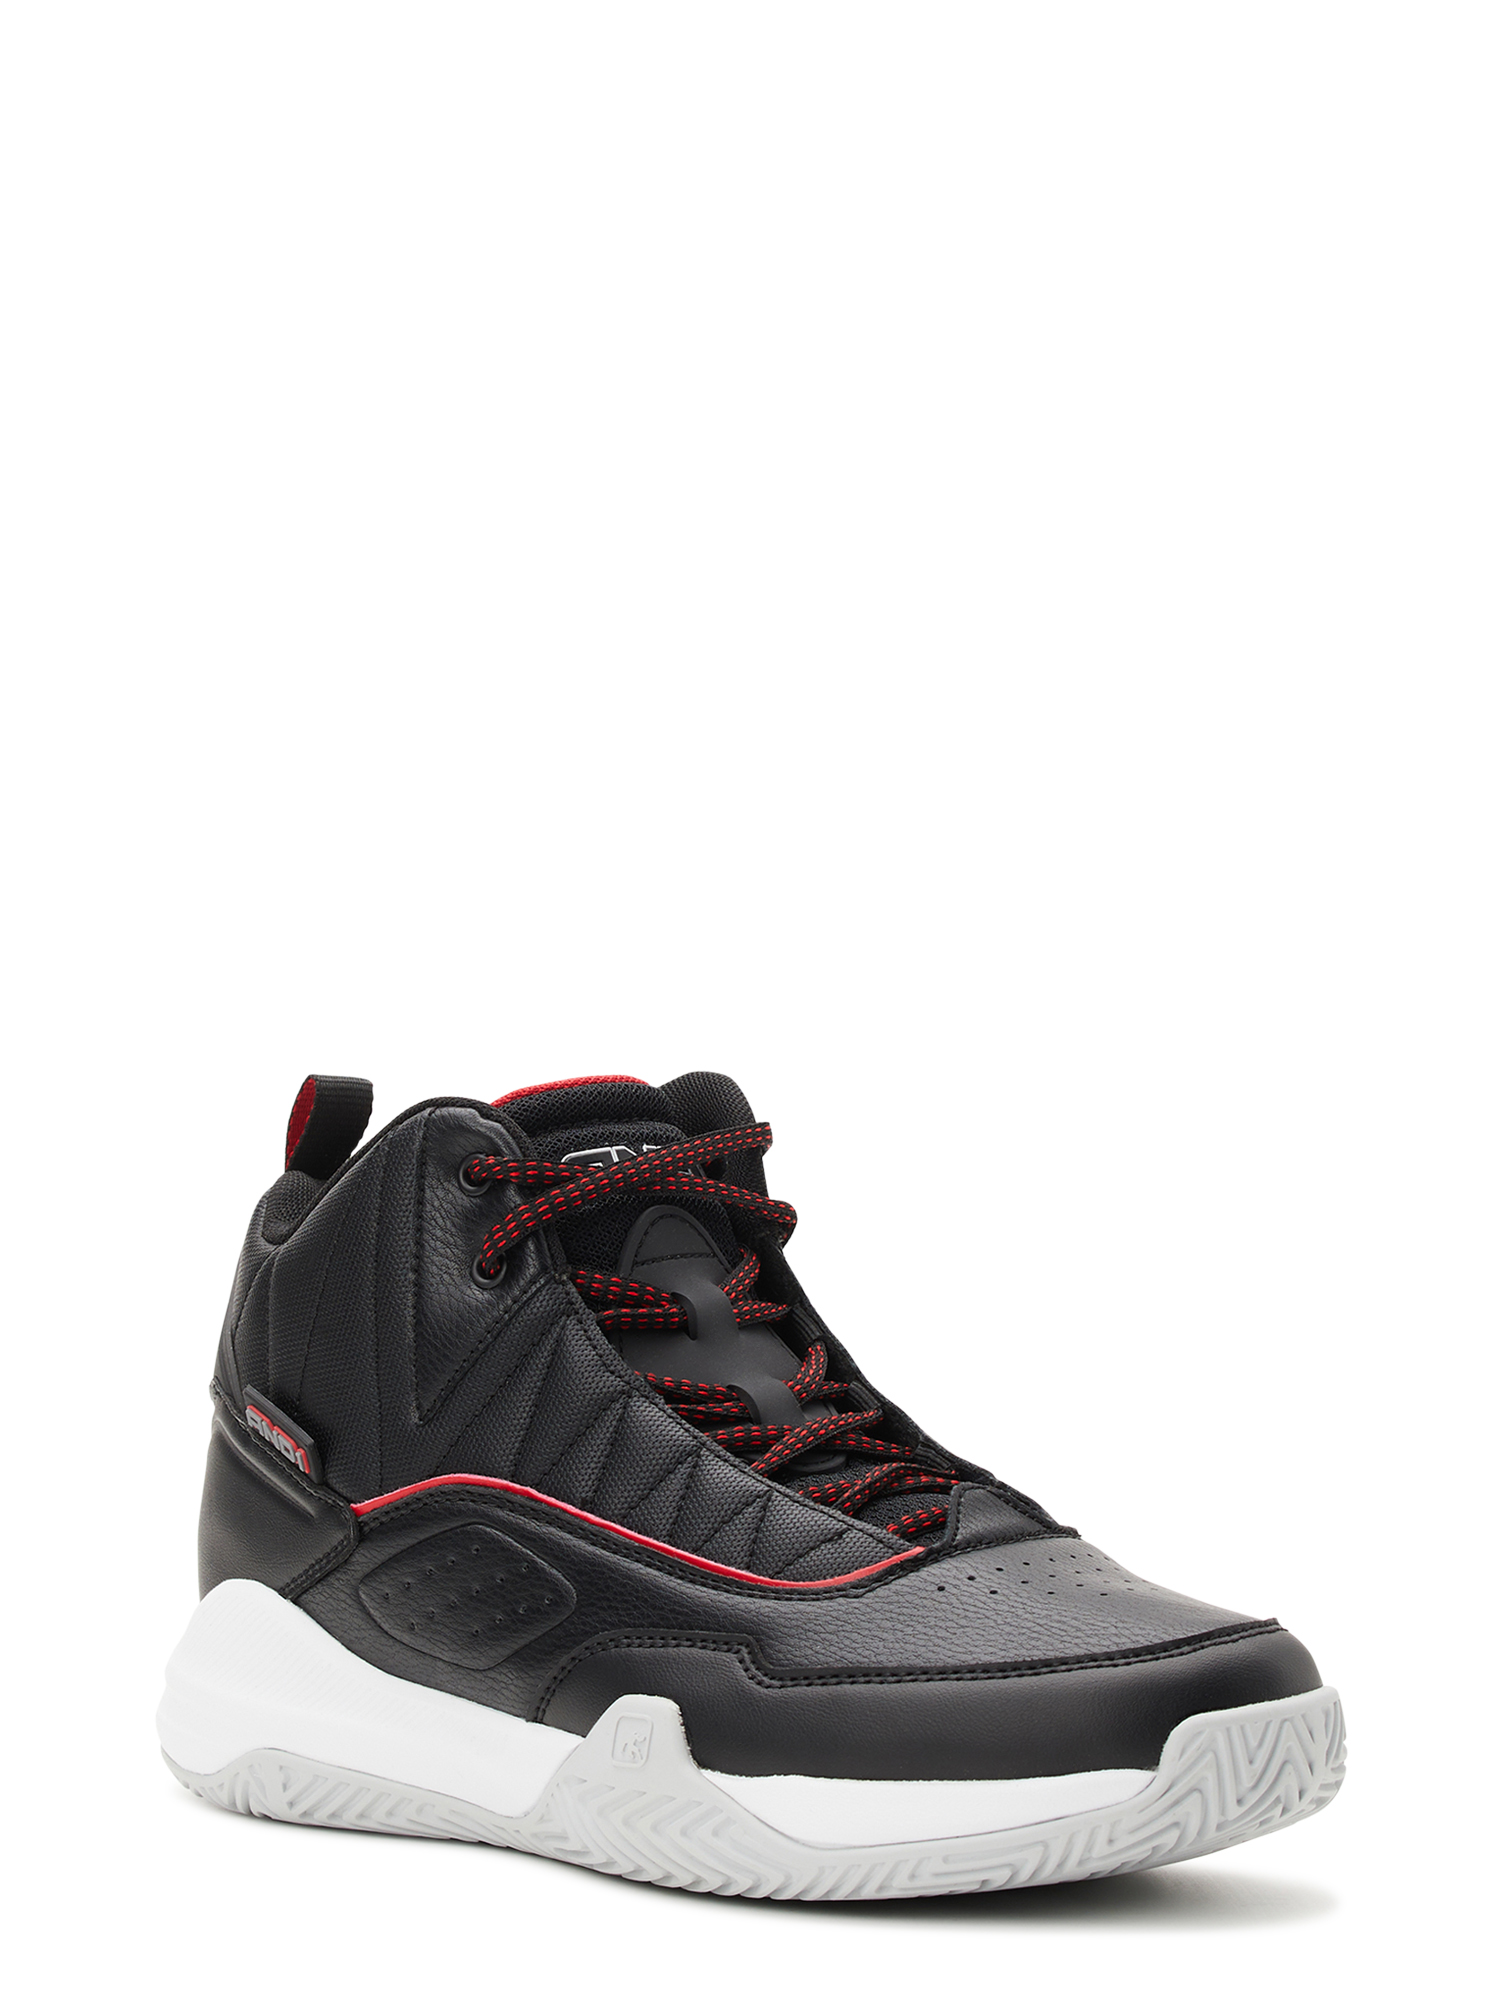 AND1 Men’s Streetball Basketball High-Top Sneakers - image 1 of 6